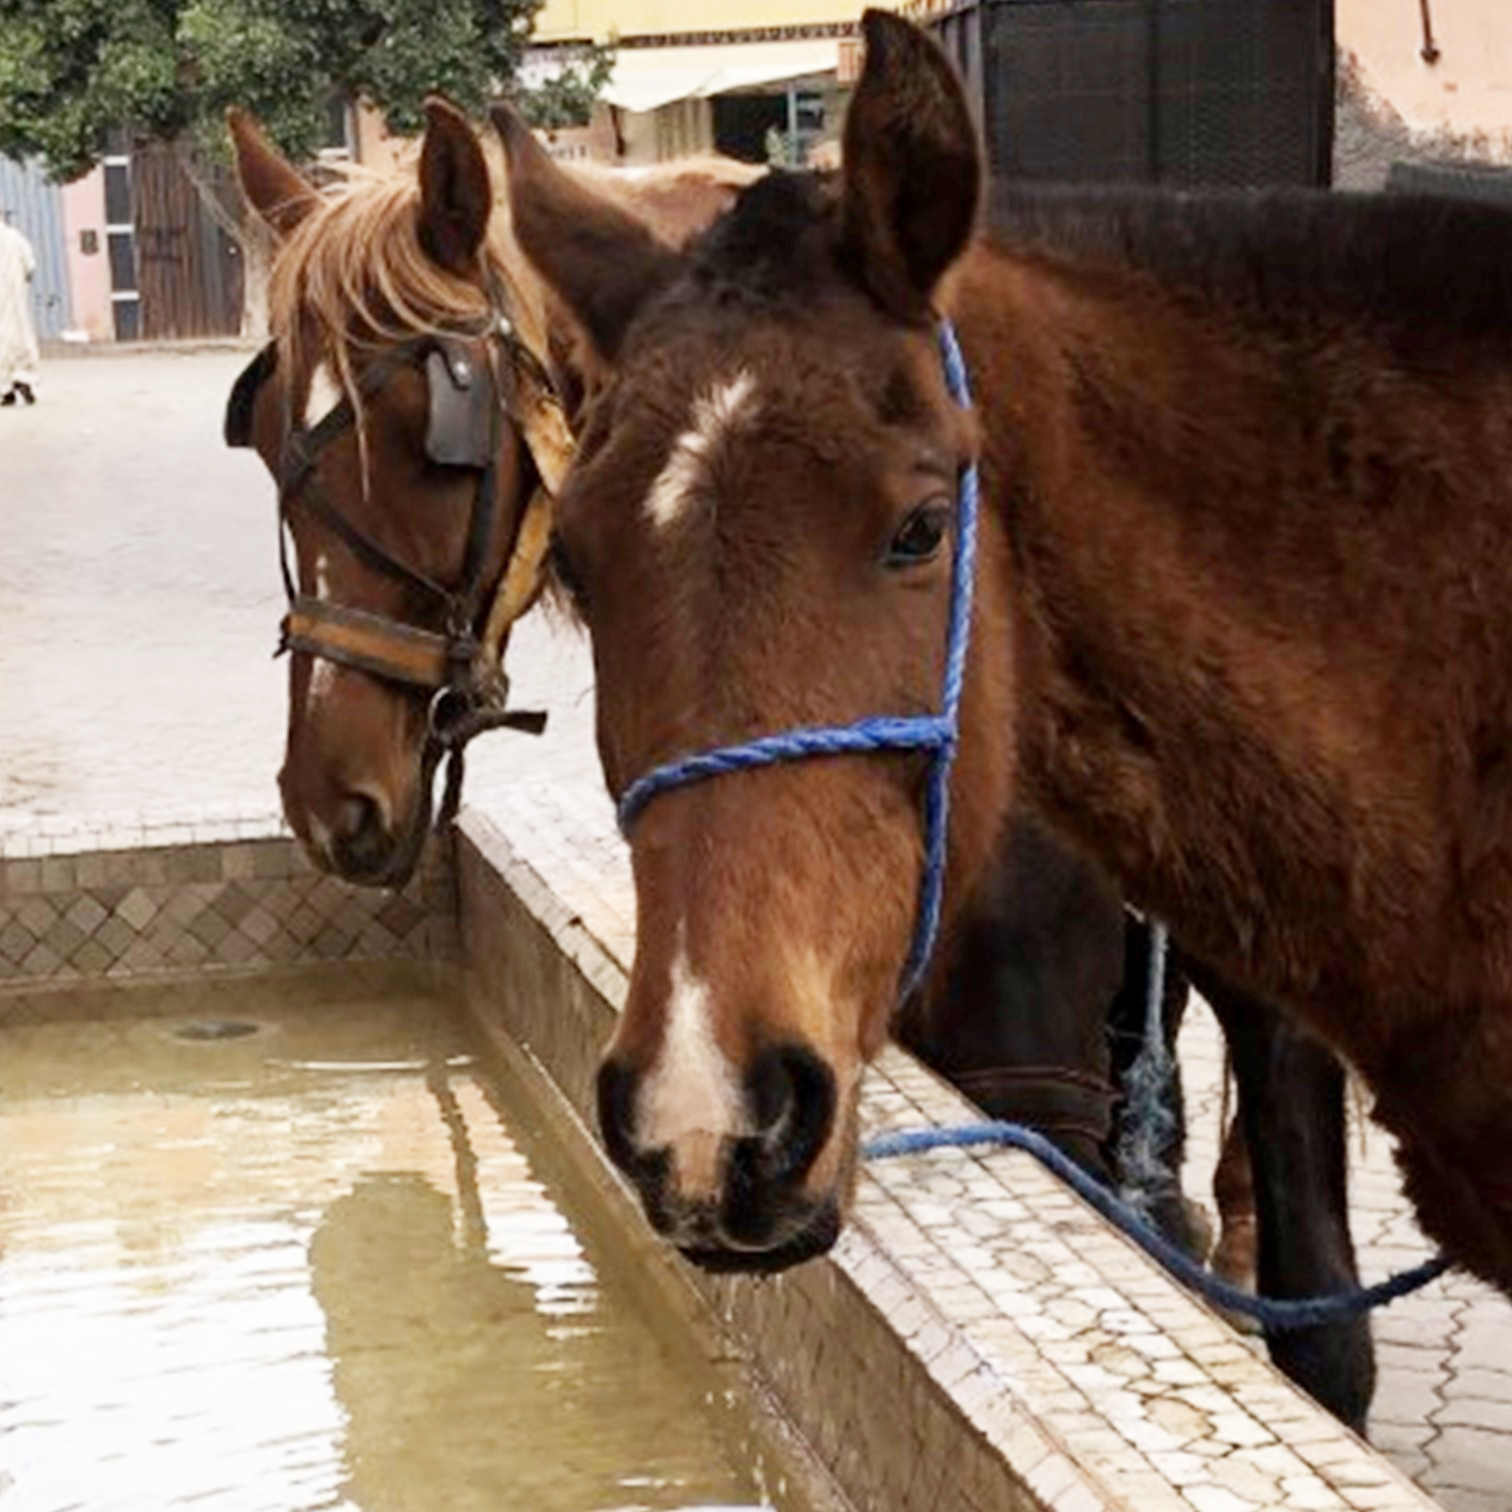 Two brown horses drinking from water trough